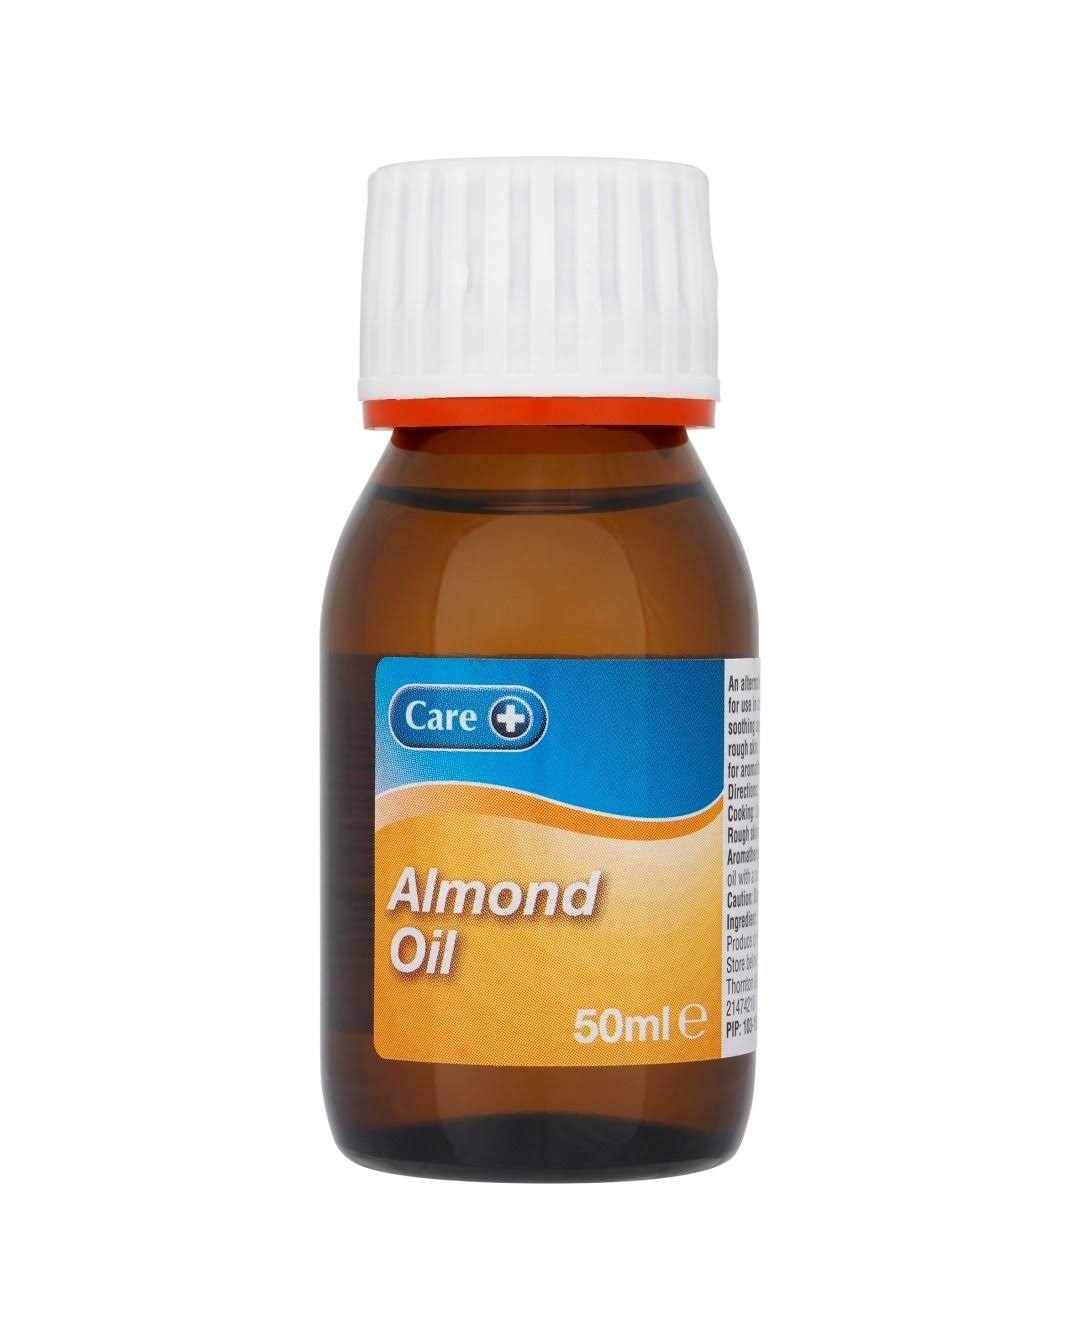 Care Almond Oil Pain Relief - 50ml